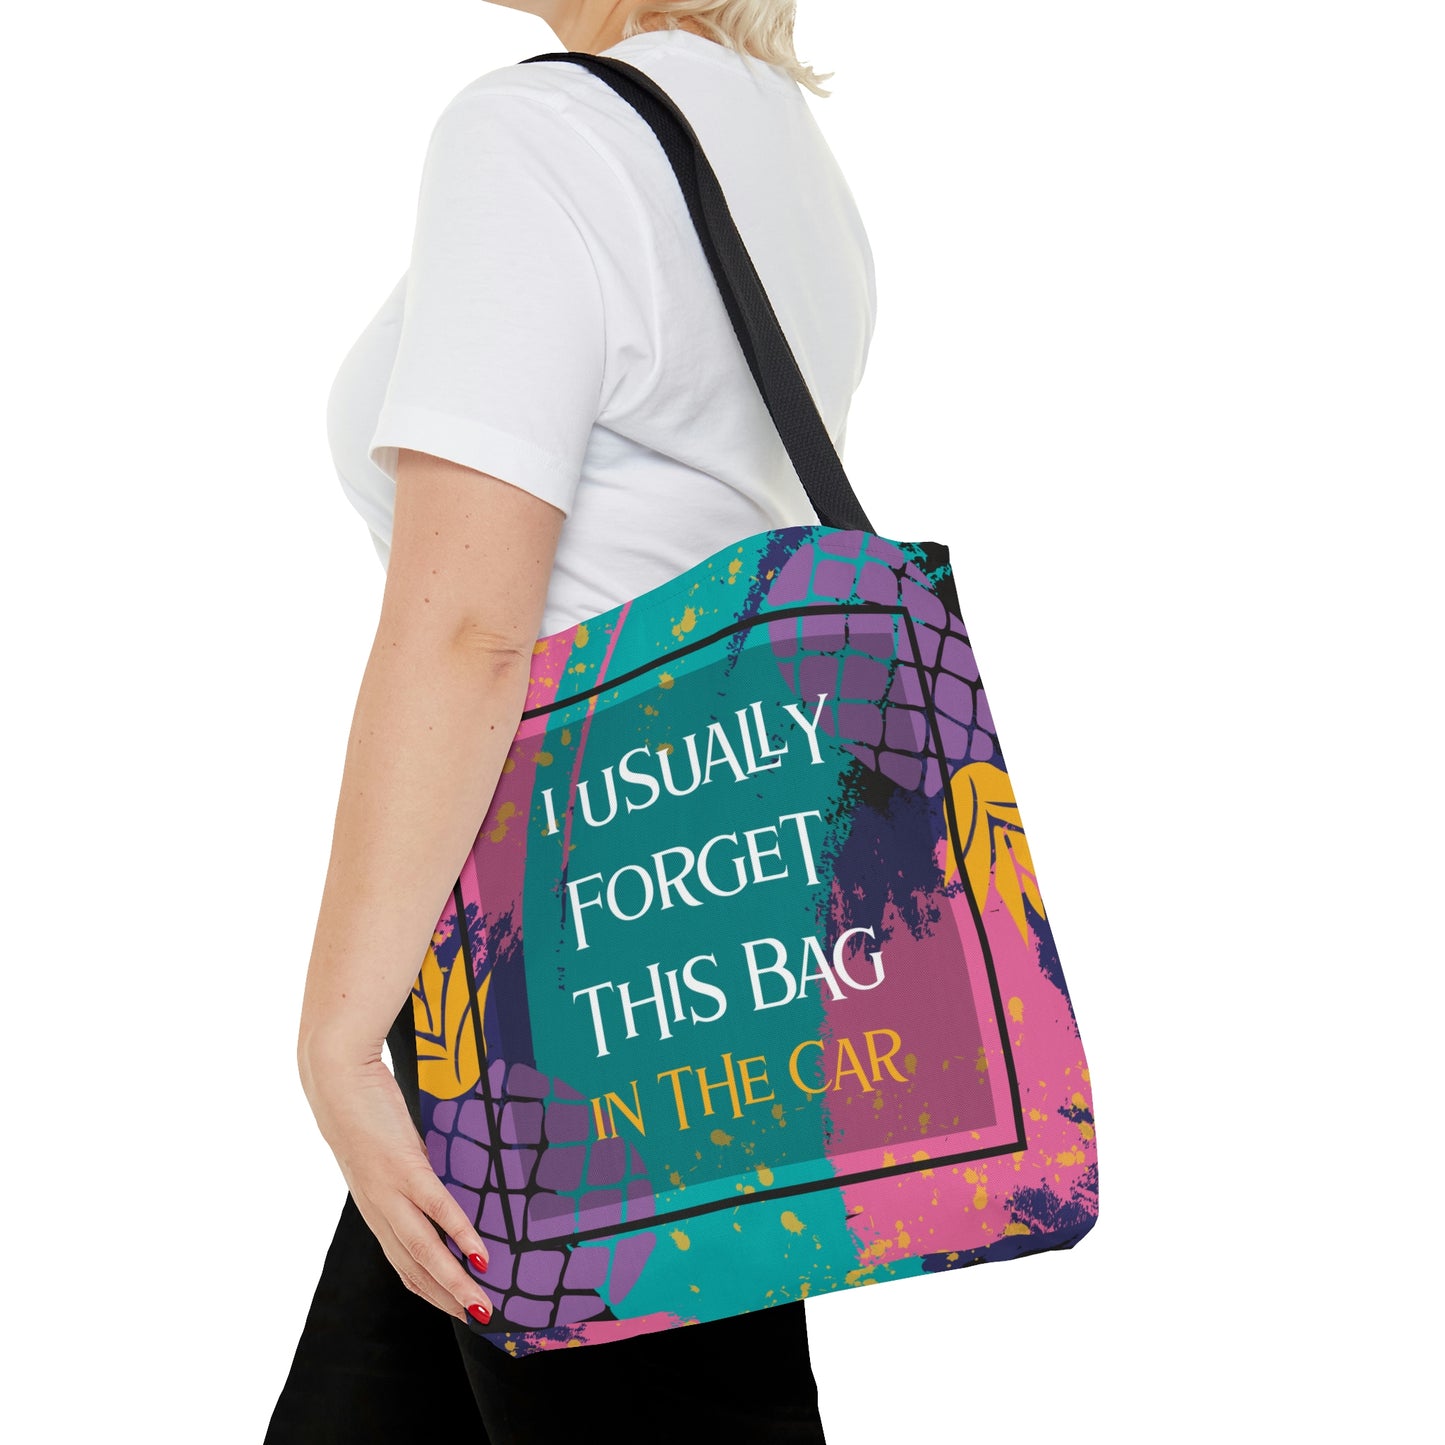 Tropical Pineapple Tote Bag - 'I Usually Forget This Bag in the Car